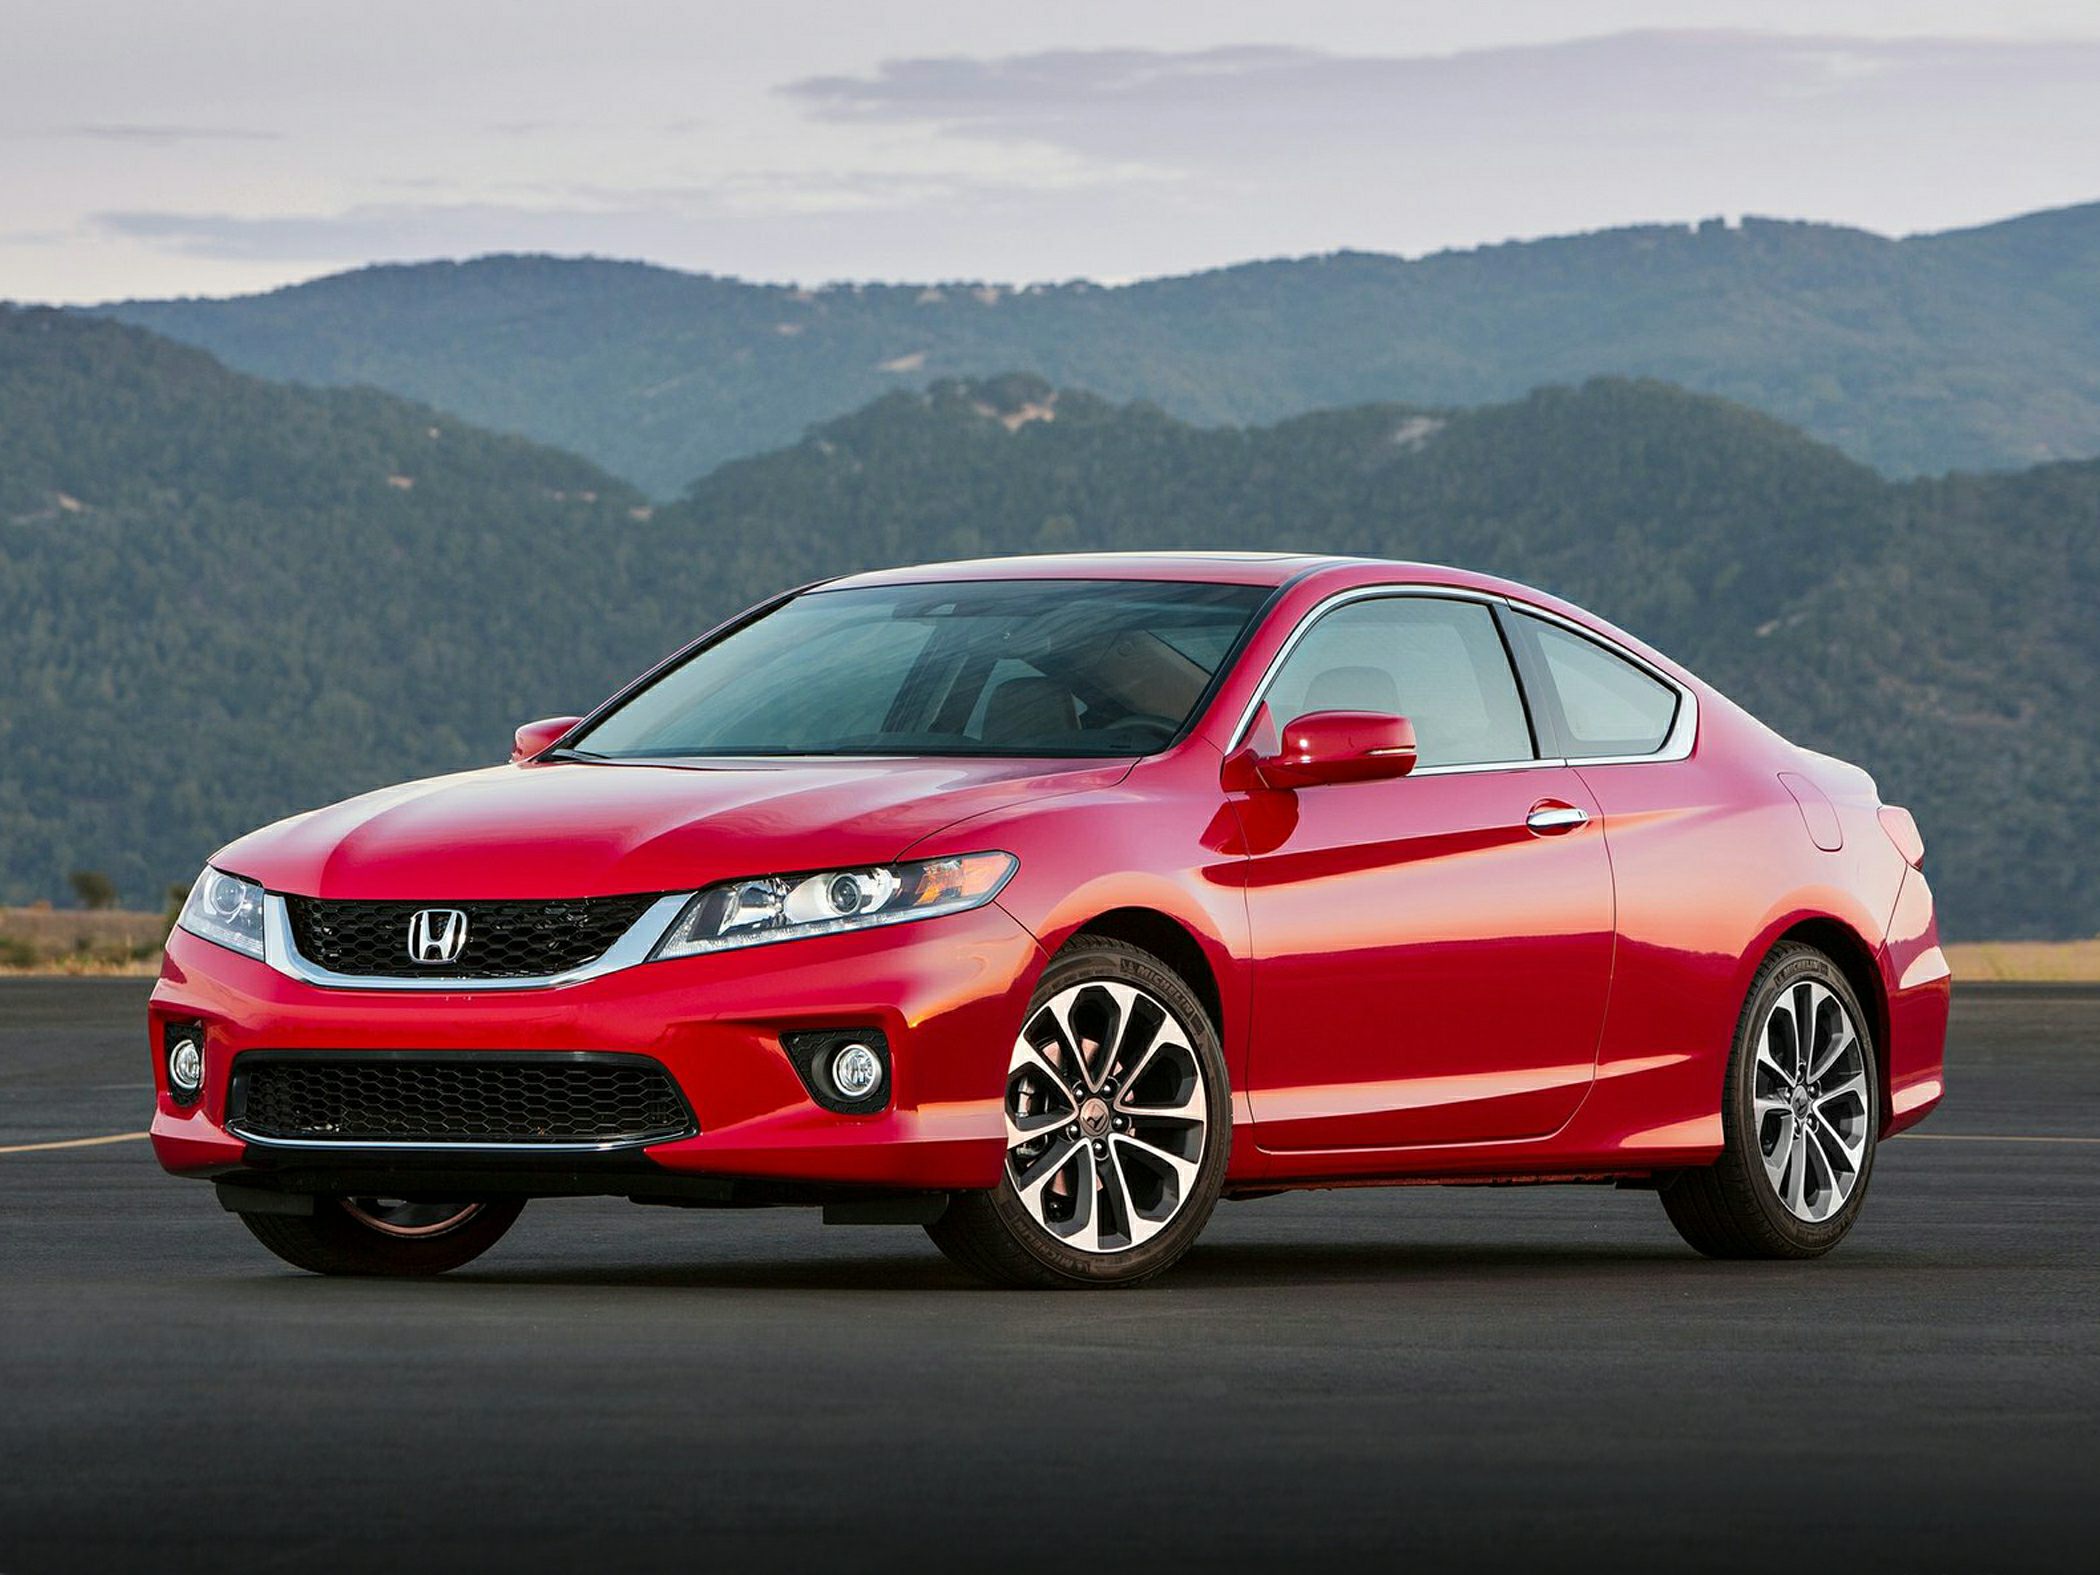 Honda Accord Coupe Hatchback Lx S 2dr Exterior Png